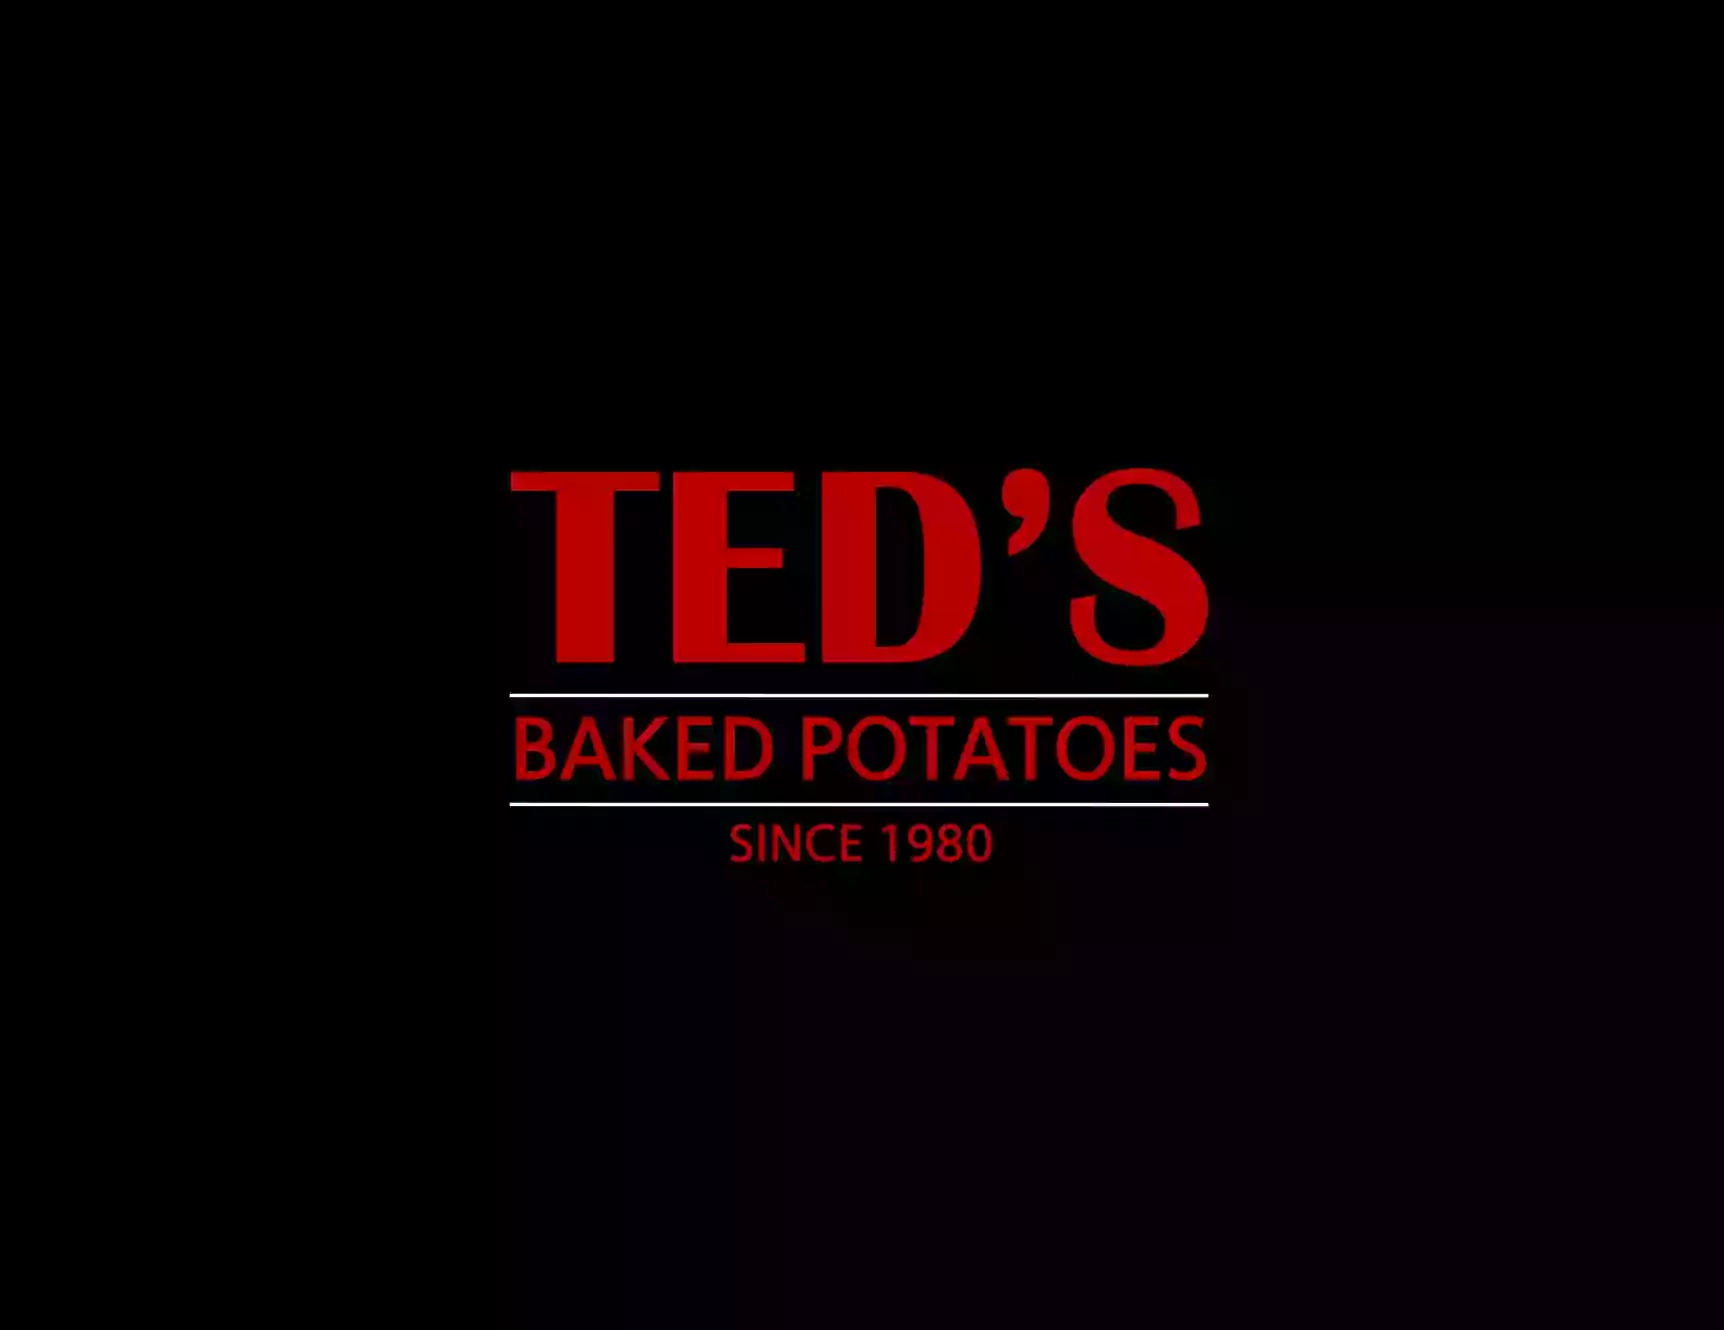 Teds Baked Potatoes